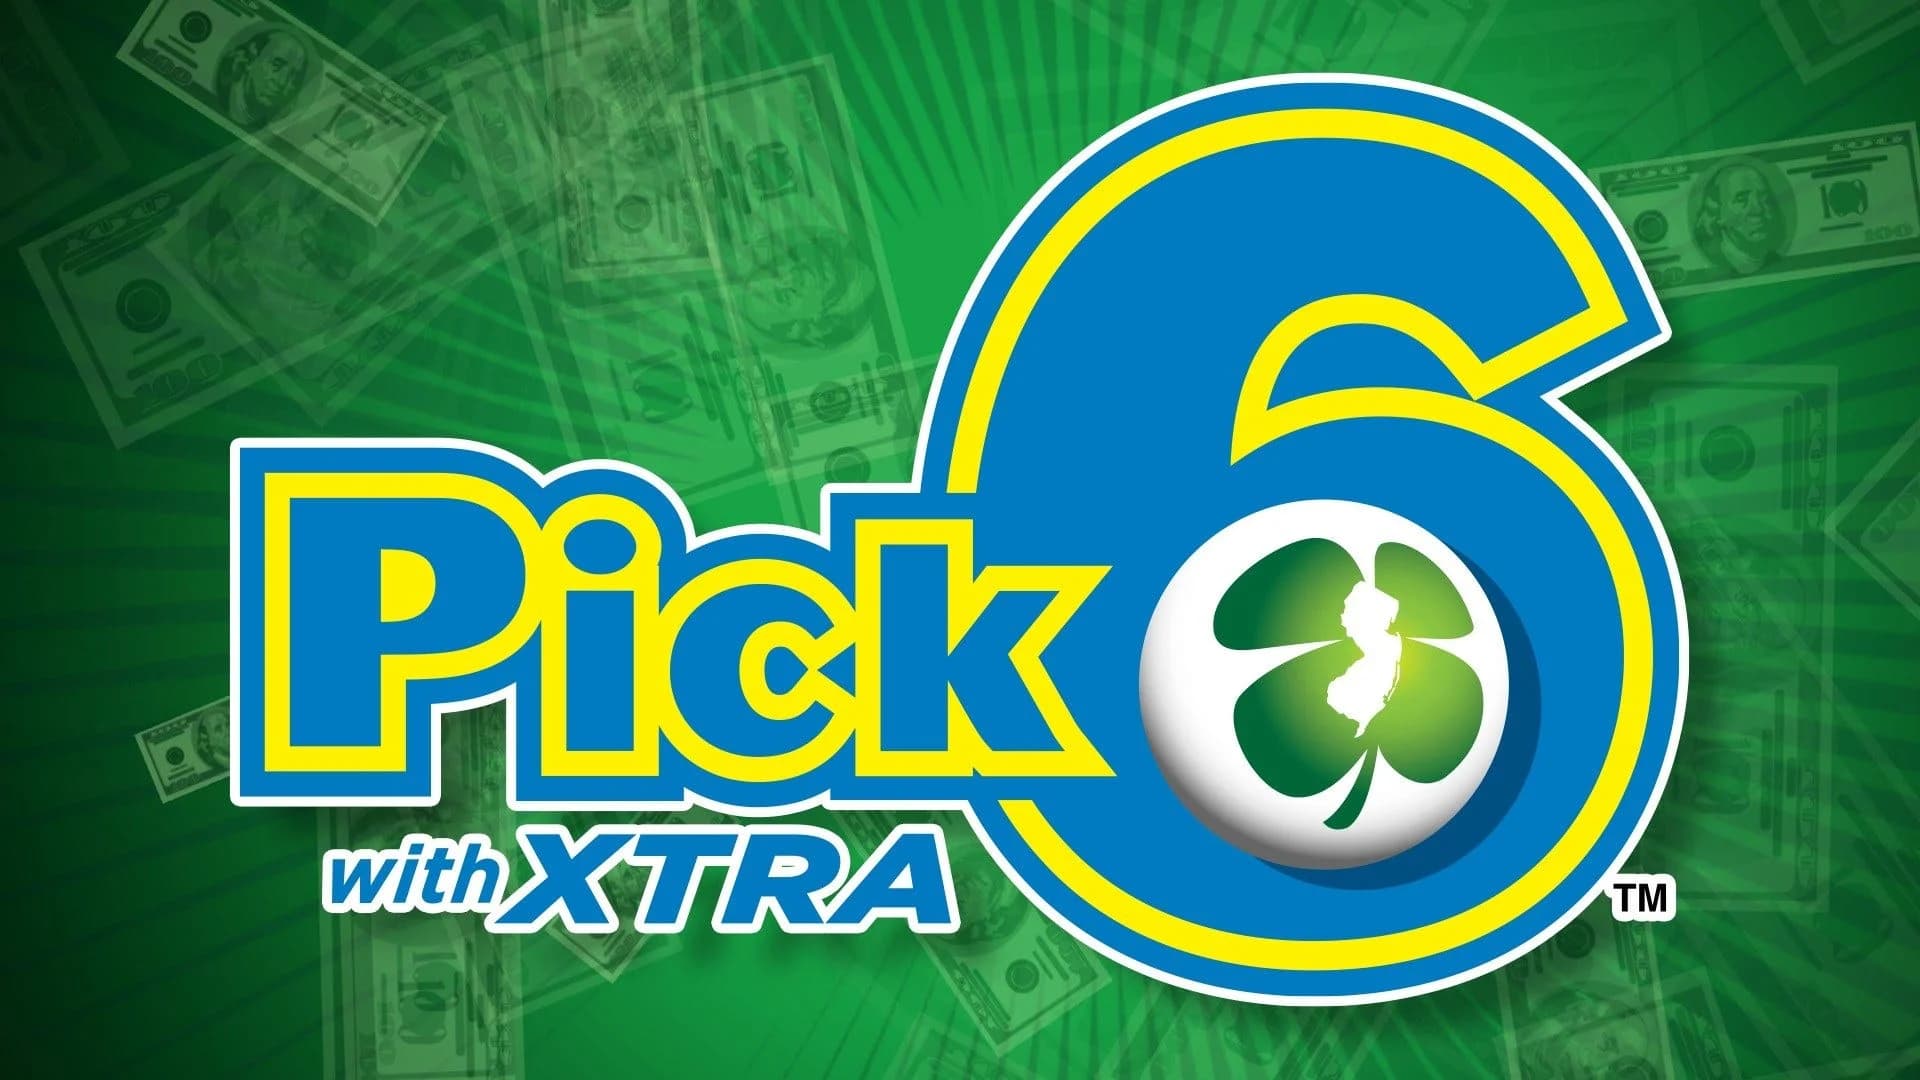 Check your tickets! A $4 million Pick-6 winning jackpot ticket was sold in New Jersey